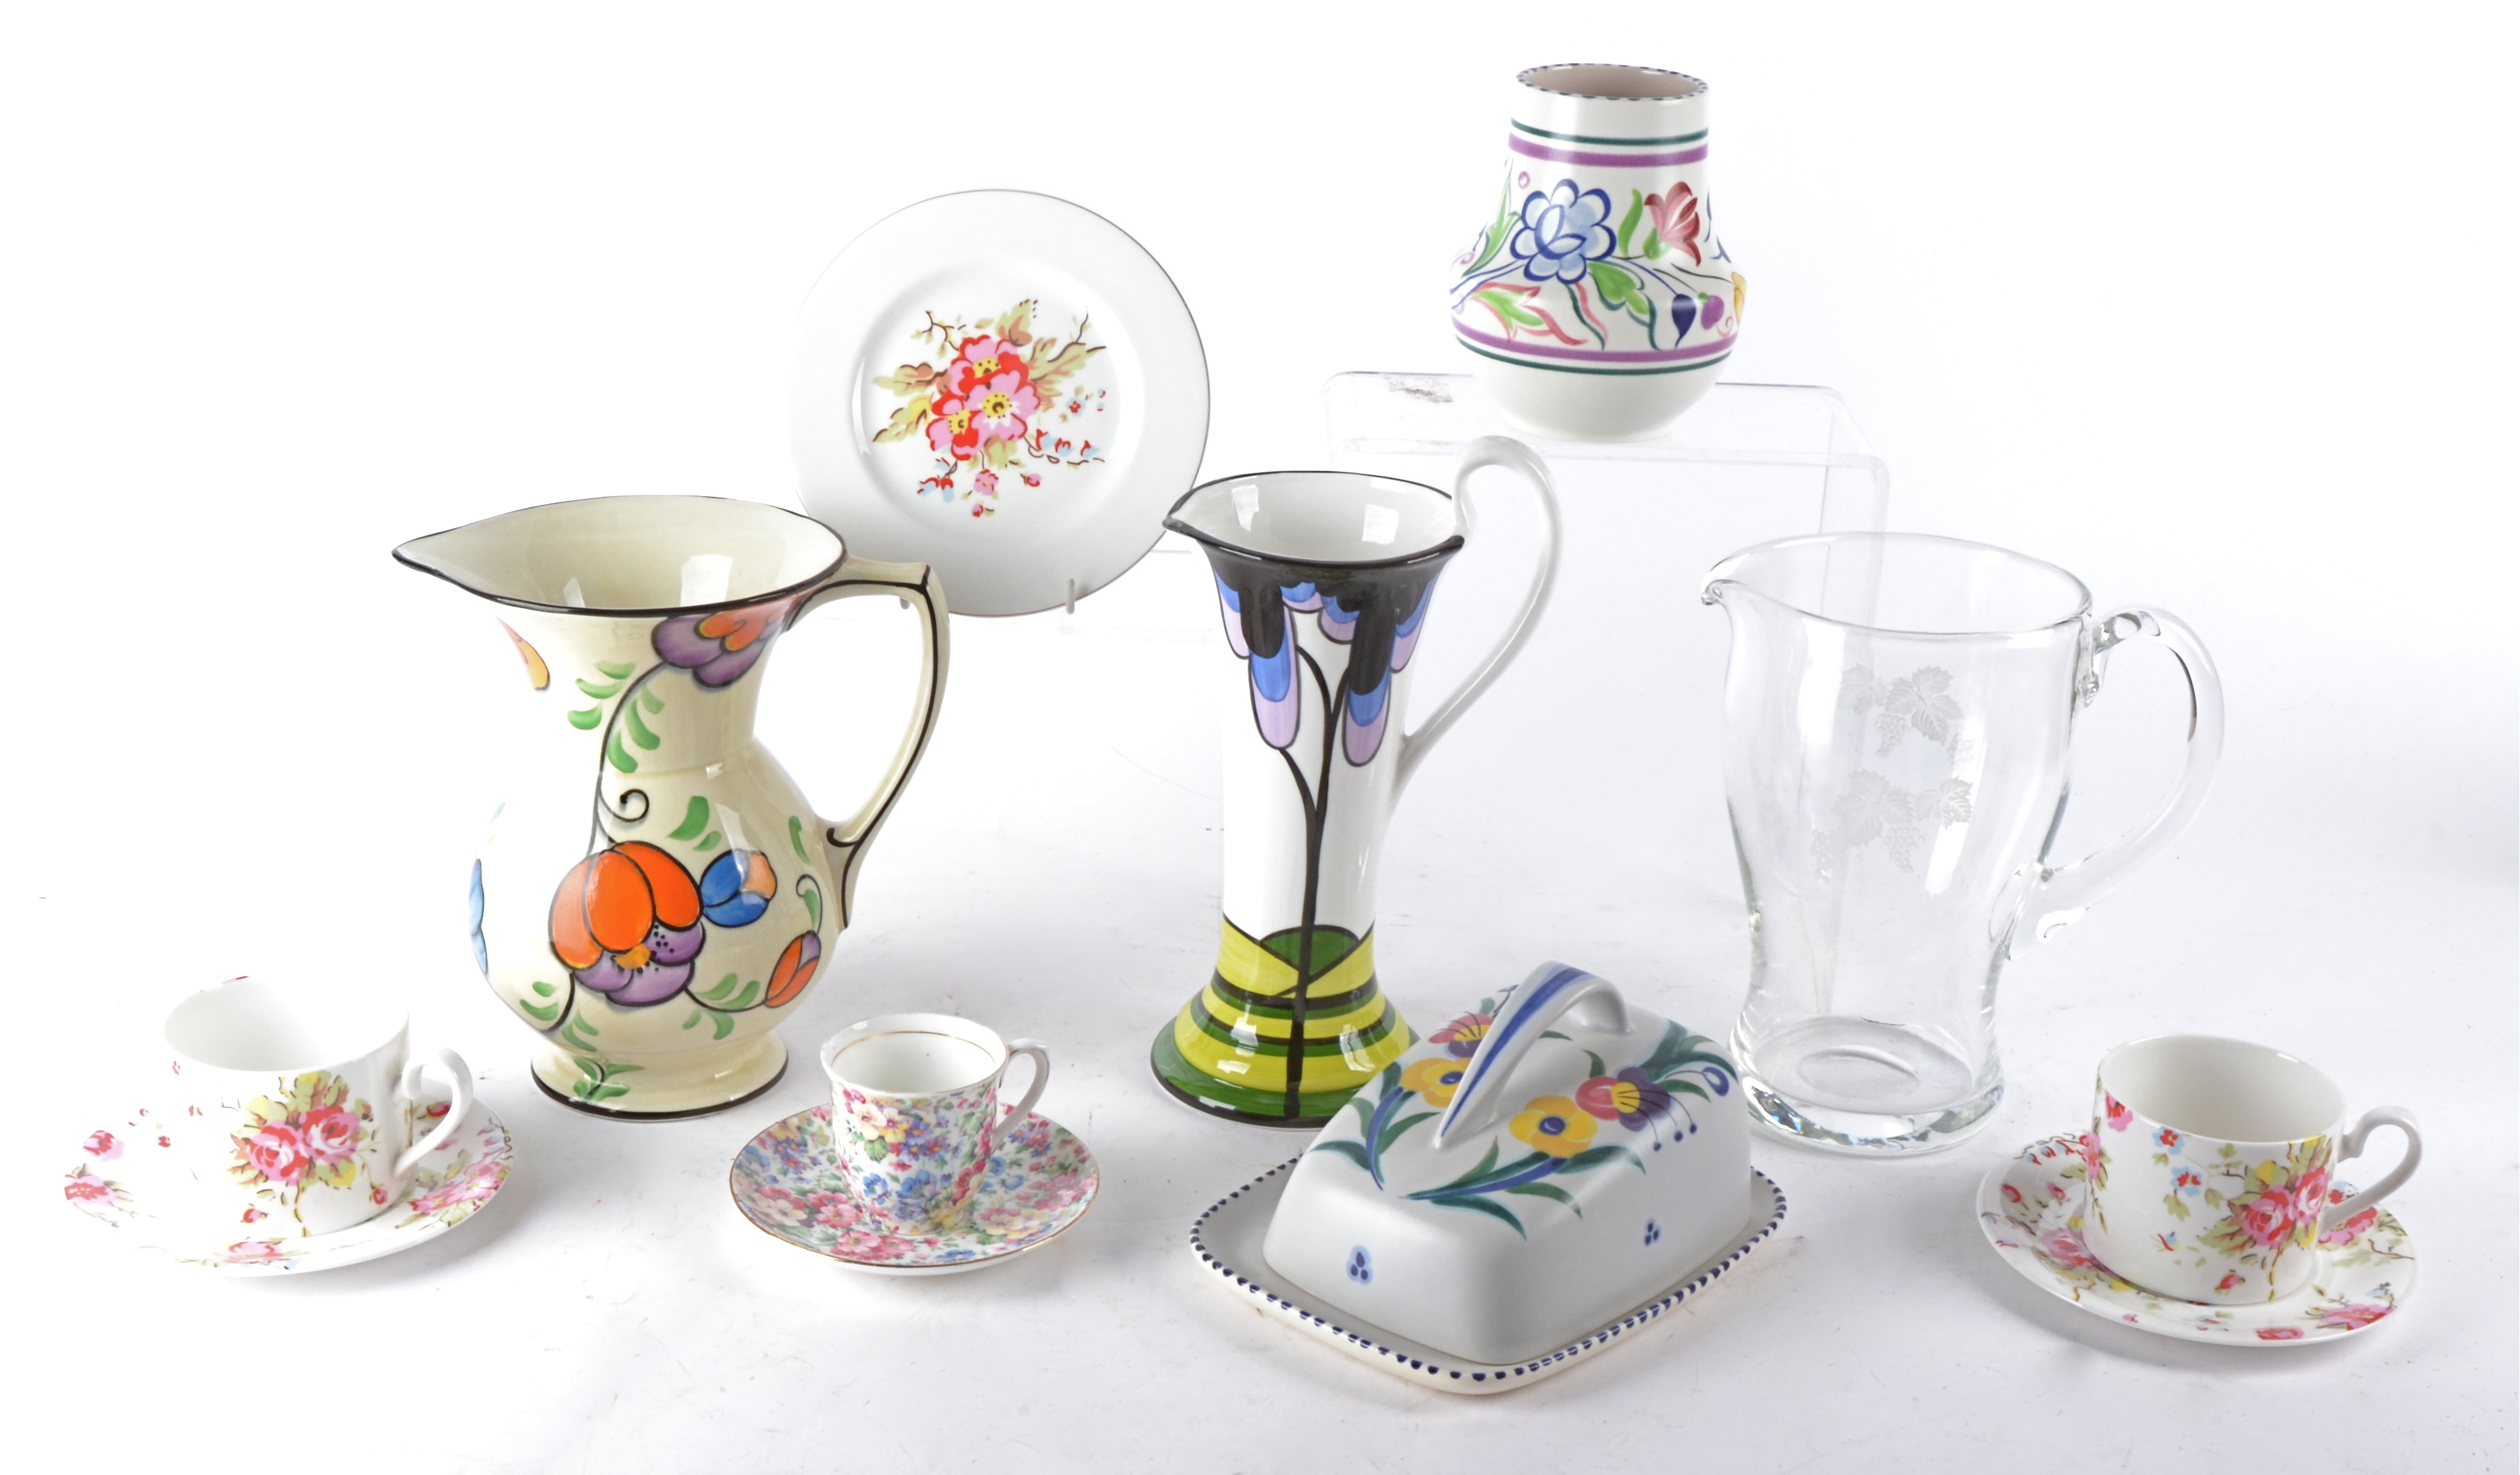 A small group of Cath Kidston designed Queens china, a Poole Pottery vase with factory stamp and